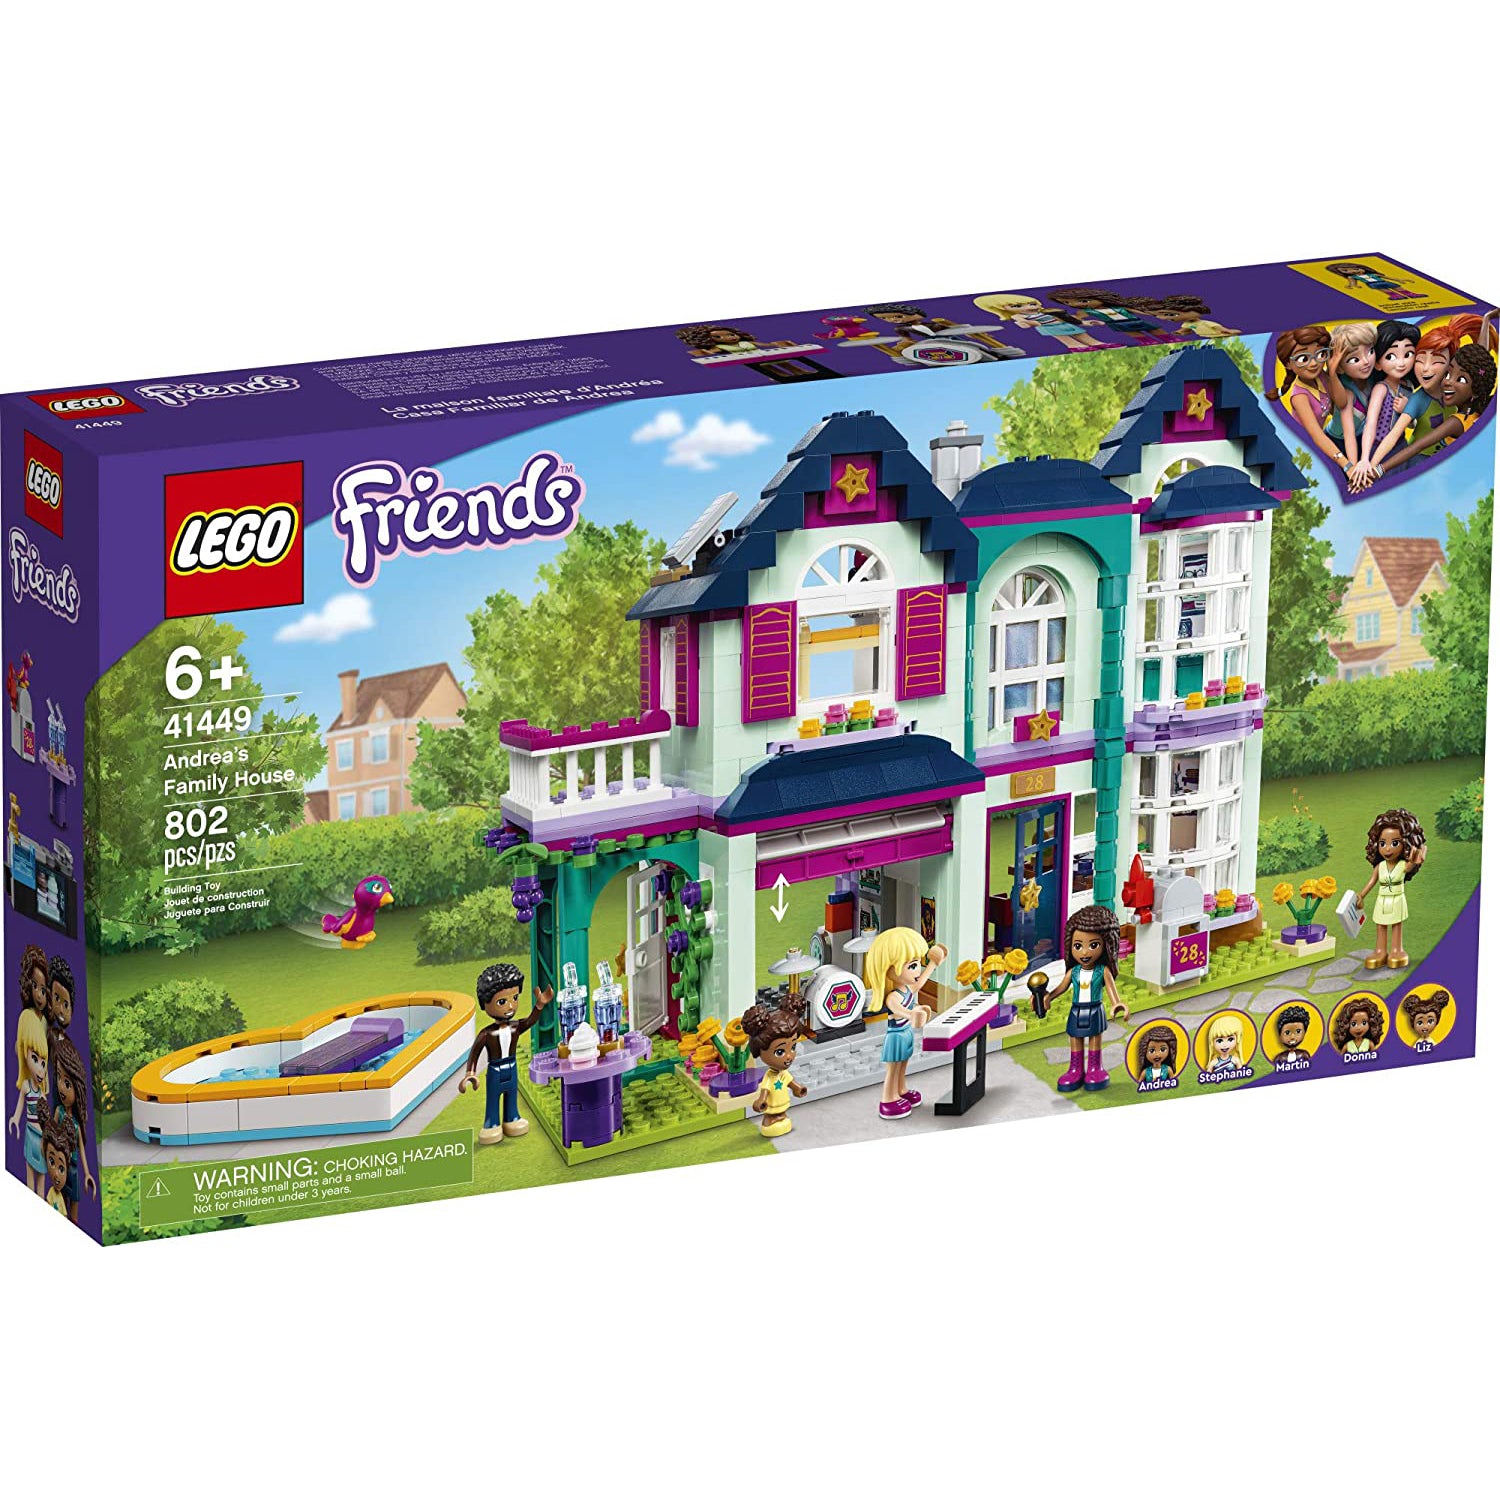 LEGO Friends Andrea's Family House [41449 - 802 Pieces]